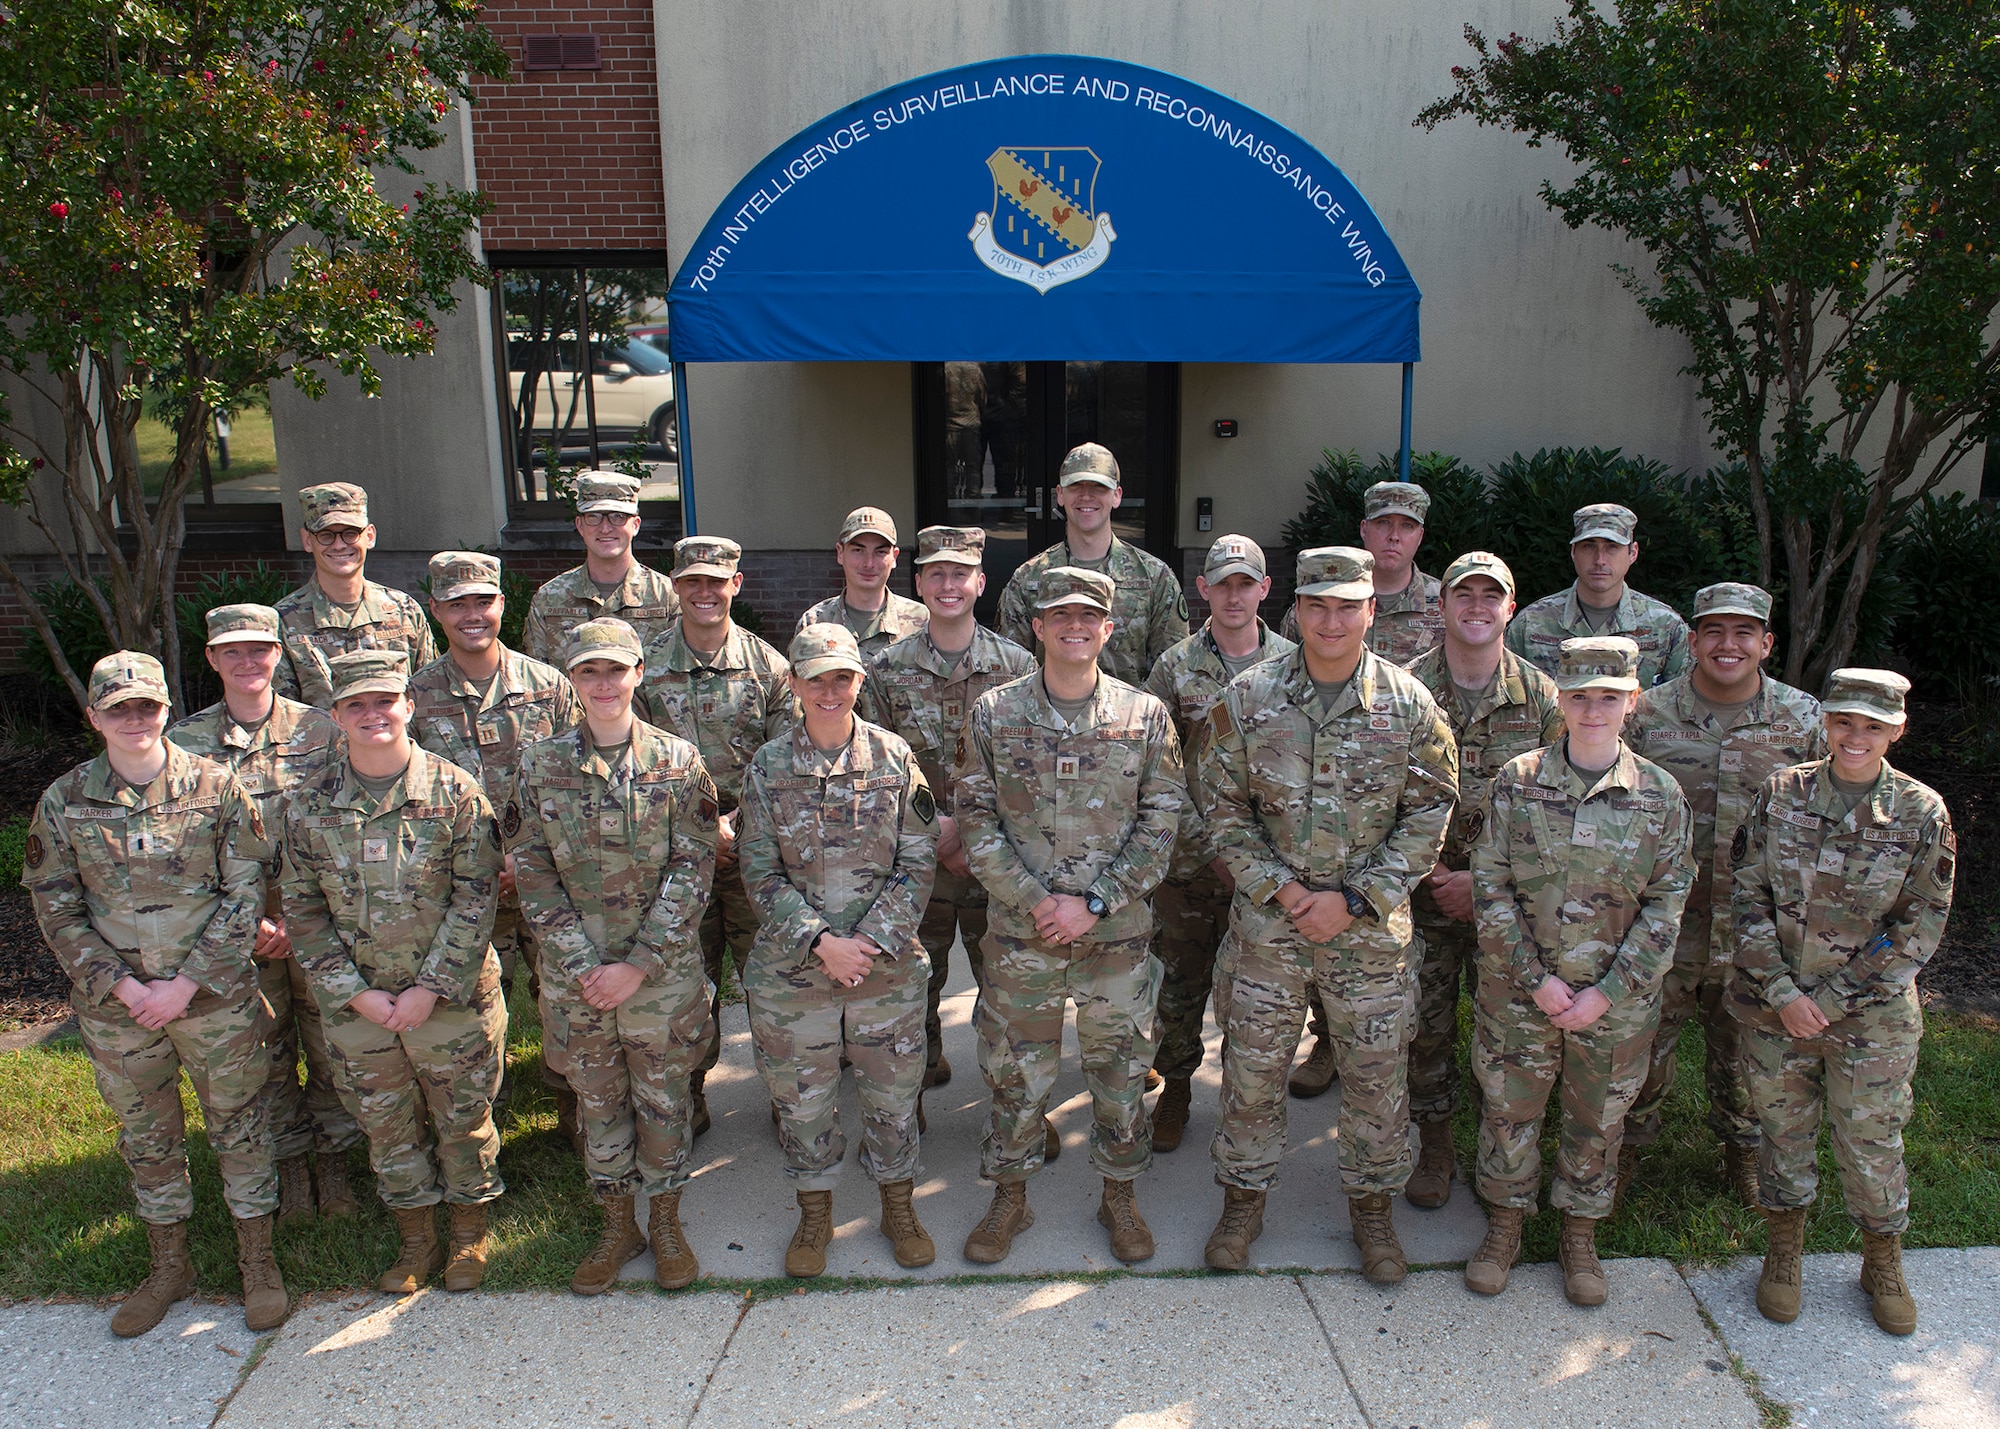 Weapons and Tactic attendees pose for a photograph at Fort George G. Meade, Maryland, Sep. 16, 2022, after the 70th Intelligence, Surveillance, and Reconnaissance Wing’s WEPTAC conference. The 70th ISRW gathered warfighters and subject-matter experts to discuss current issues and develop solutions for the joint employment of forces.